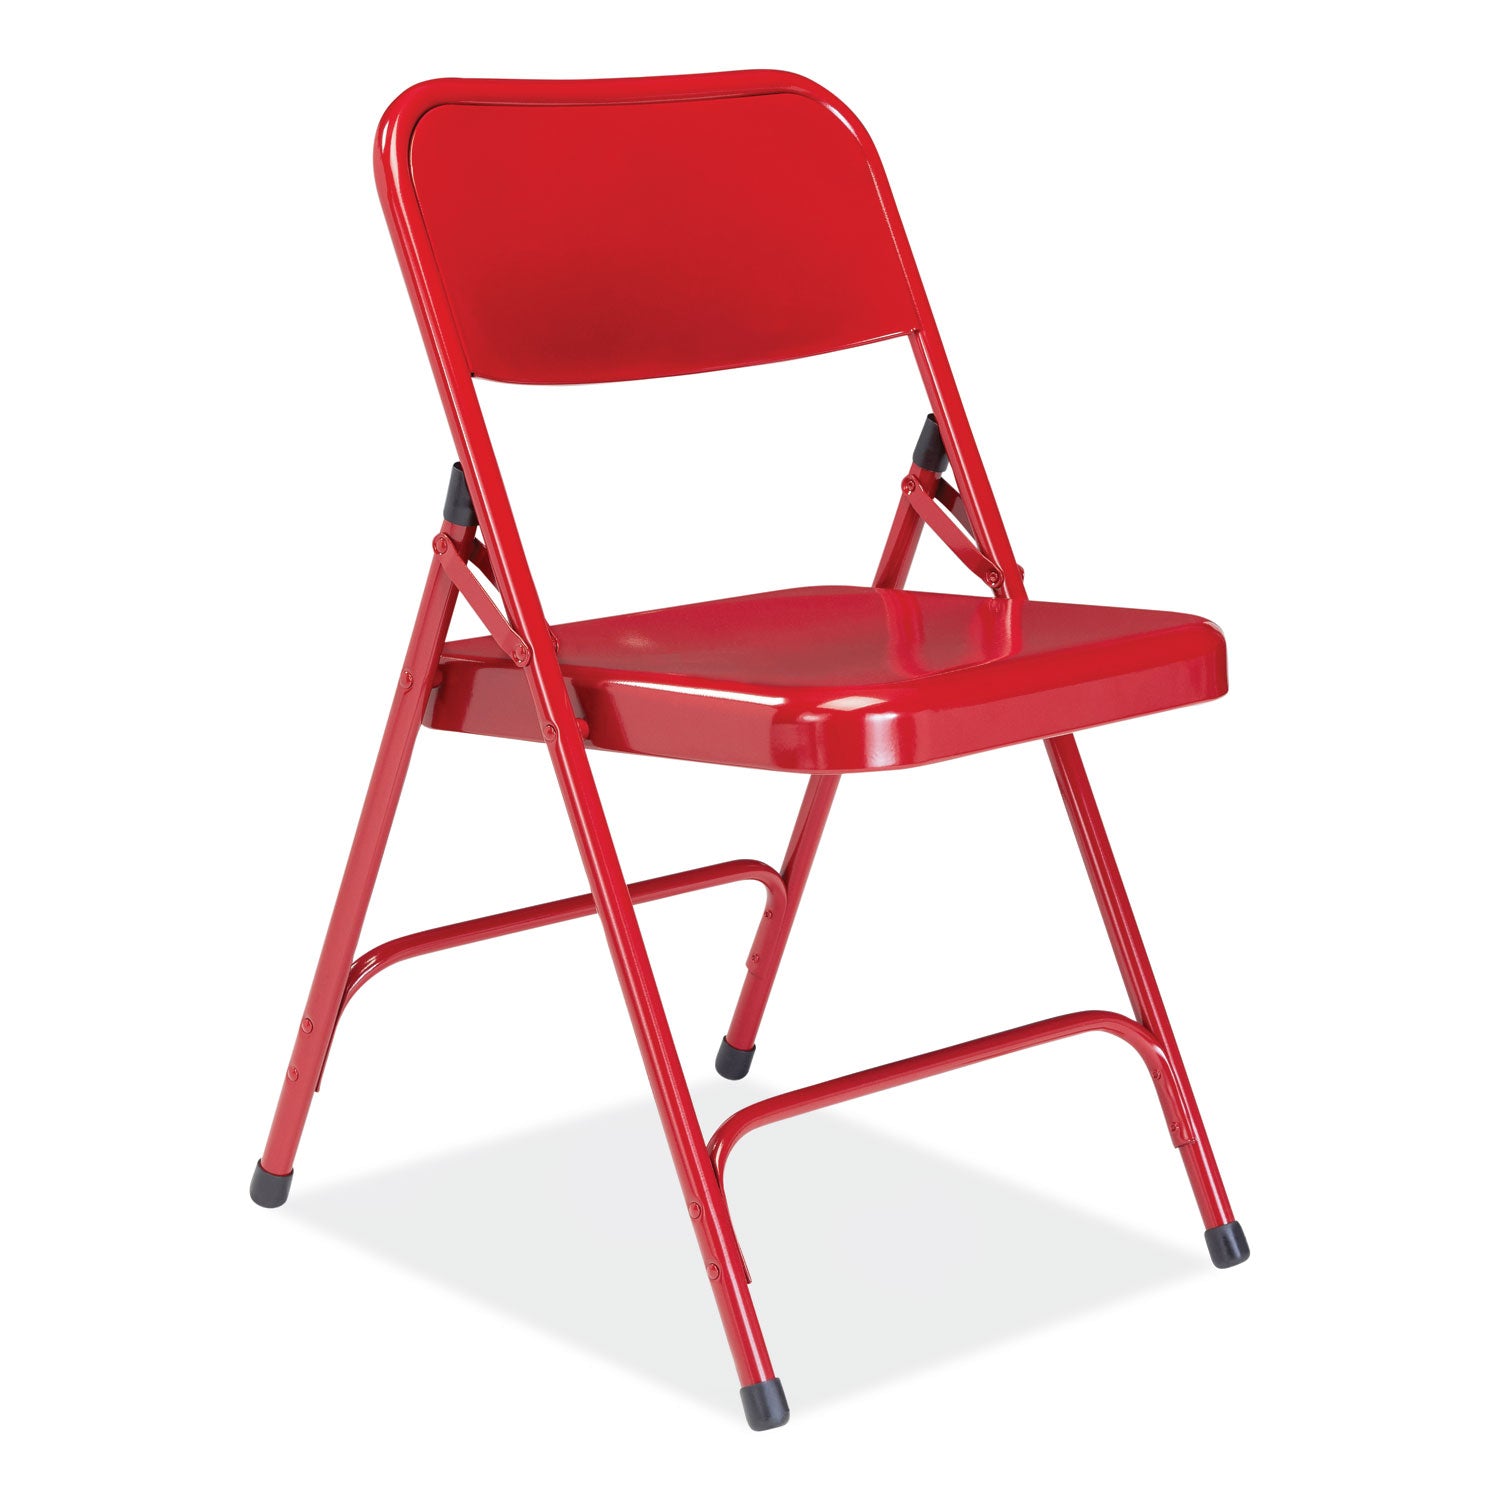 200-series-premium-all-steel-double-hinge-folding-chair-supports-500-lb-1725-seat-height-red-4-ctships-in-1-3-bus-days_nps240 - 2